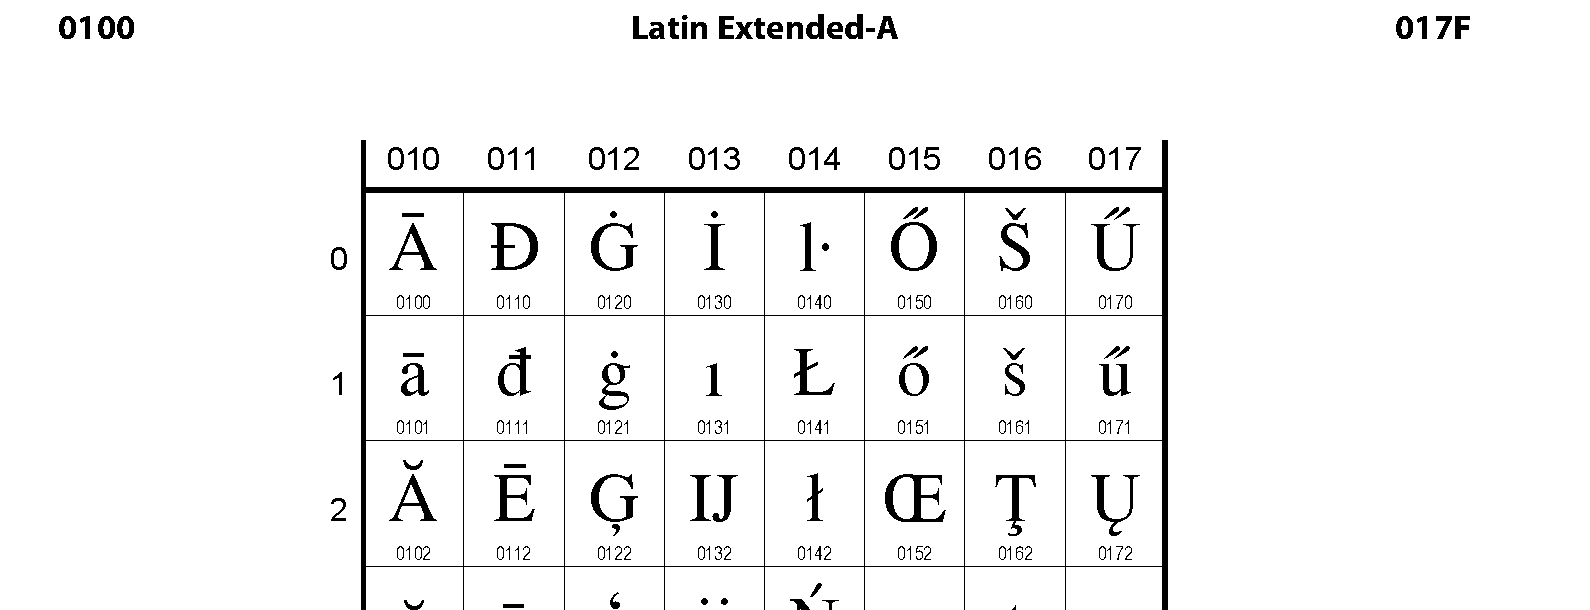 Unicode - Latin Extended-A